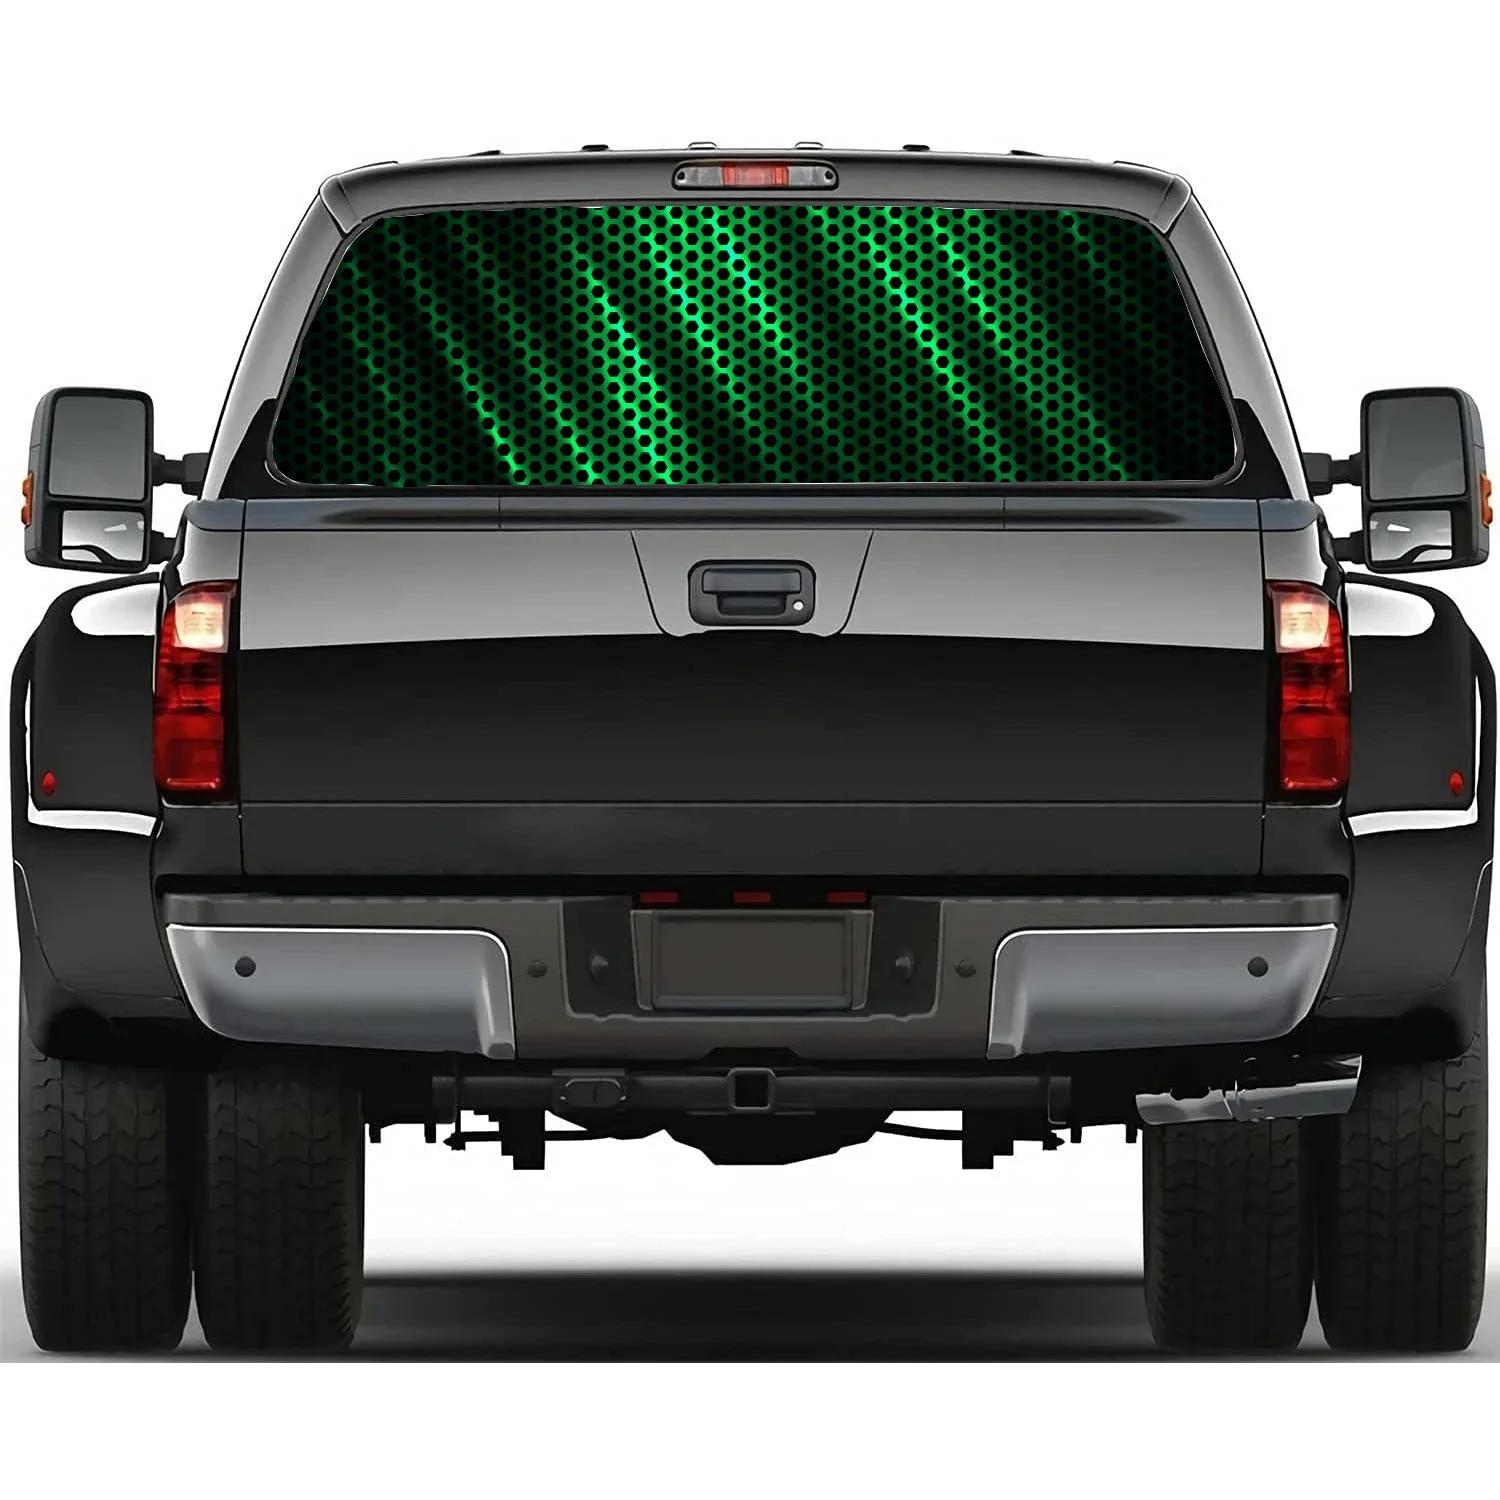 

Modern Abstract Futuristic Rear Window Decal Fit Pickup,Truck,Car Universal See Through Perforated Back Windows Vinyl Sticker